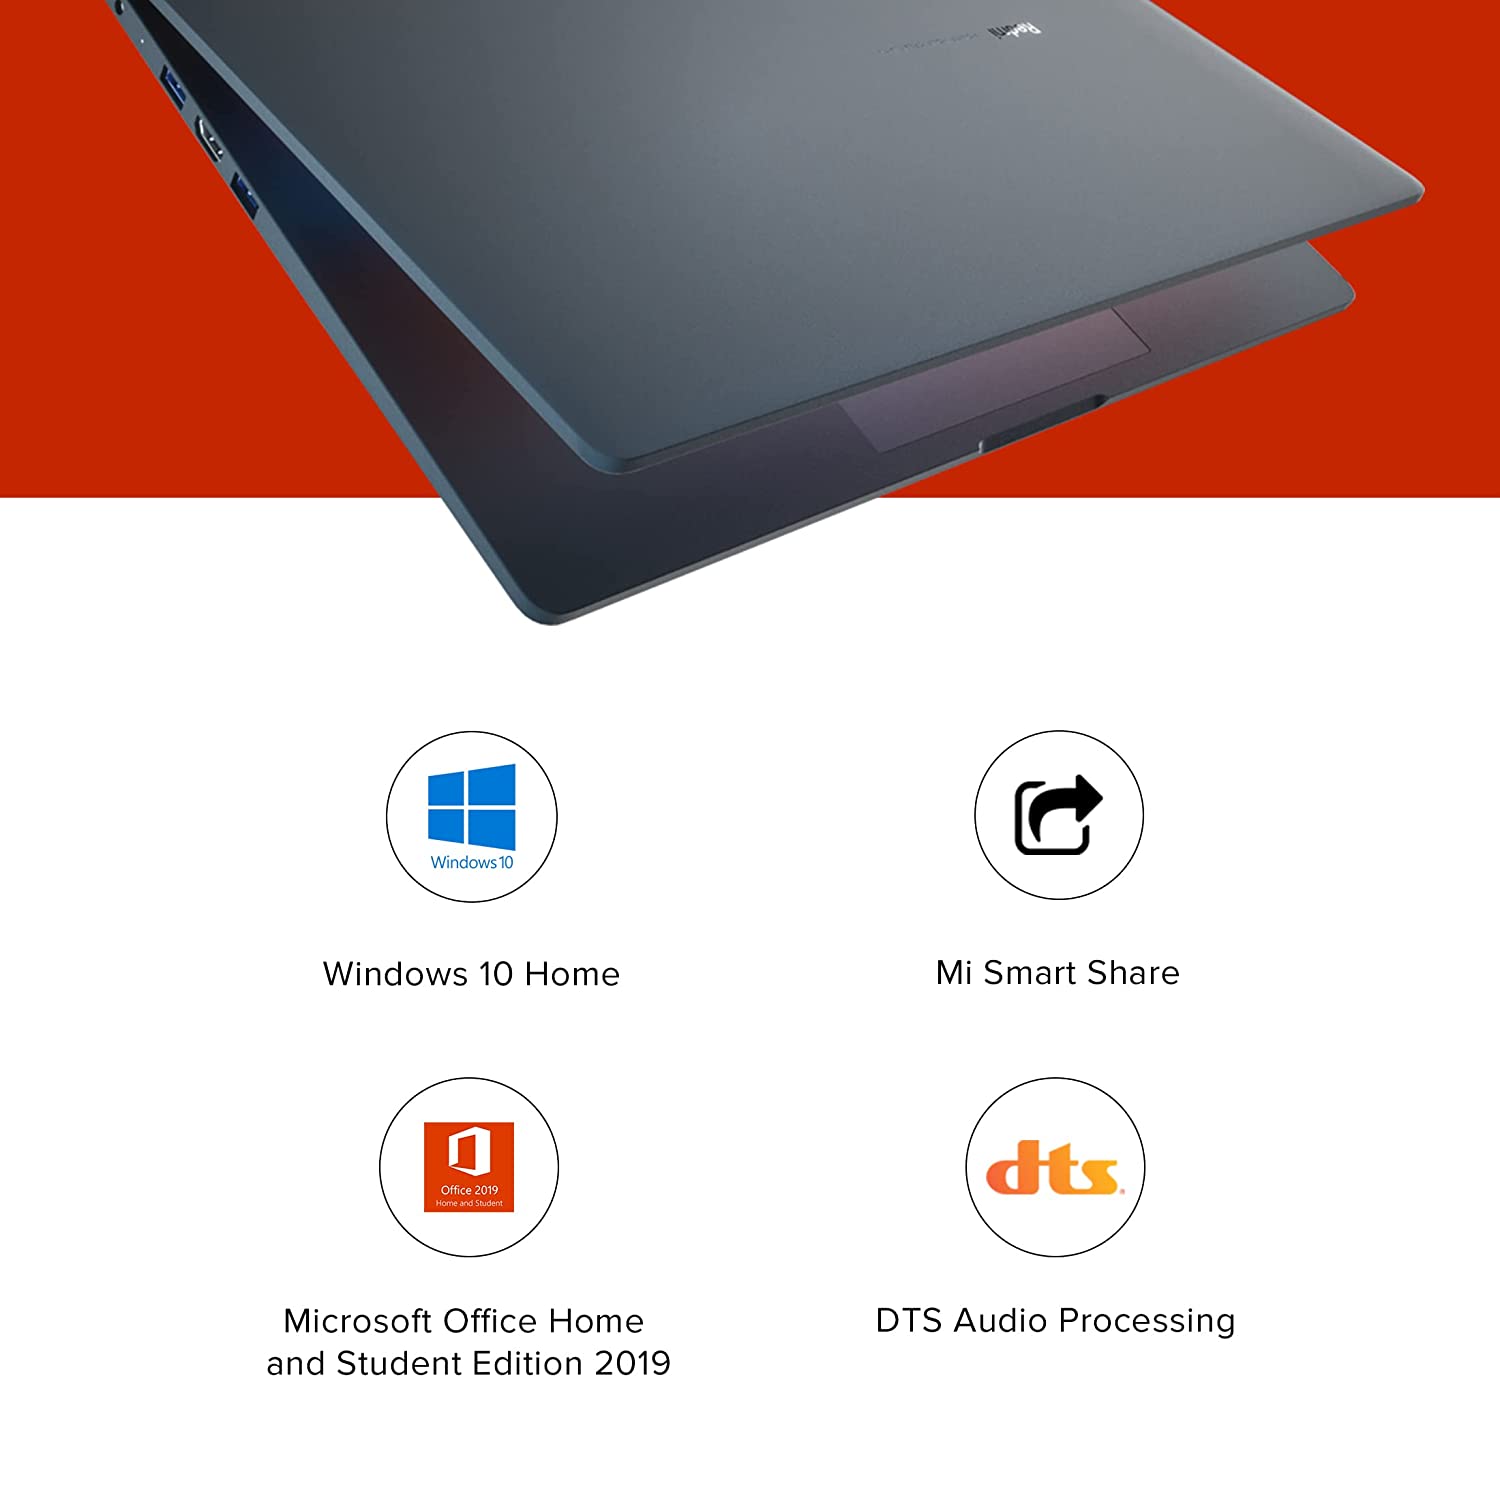 Pay as low as ₹1312 per month to get the RedmiBook 15